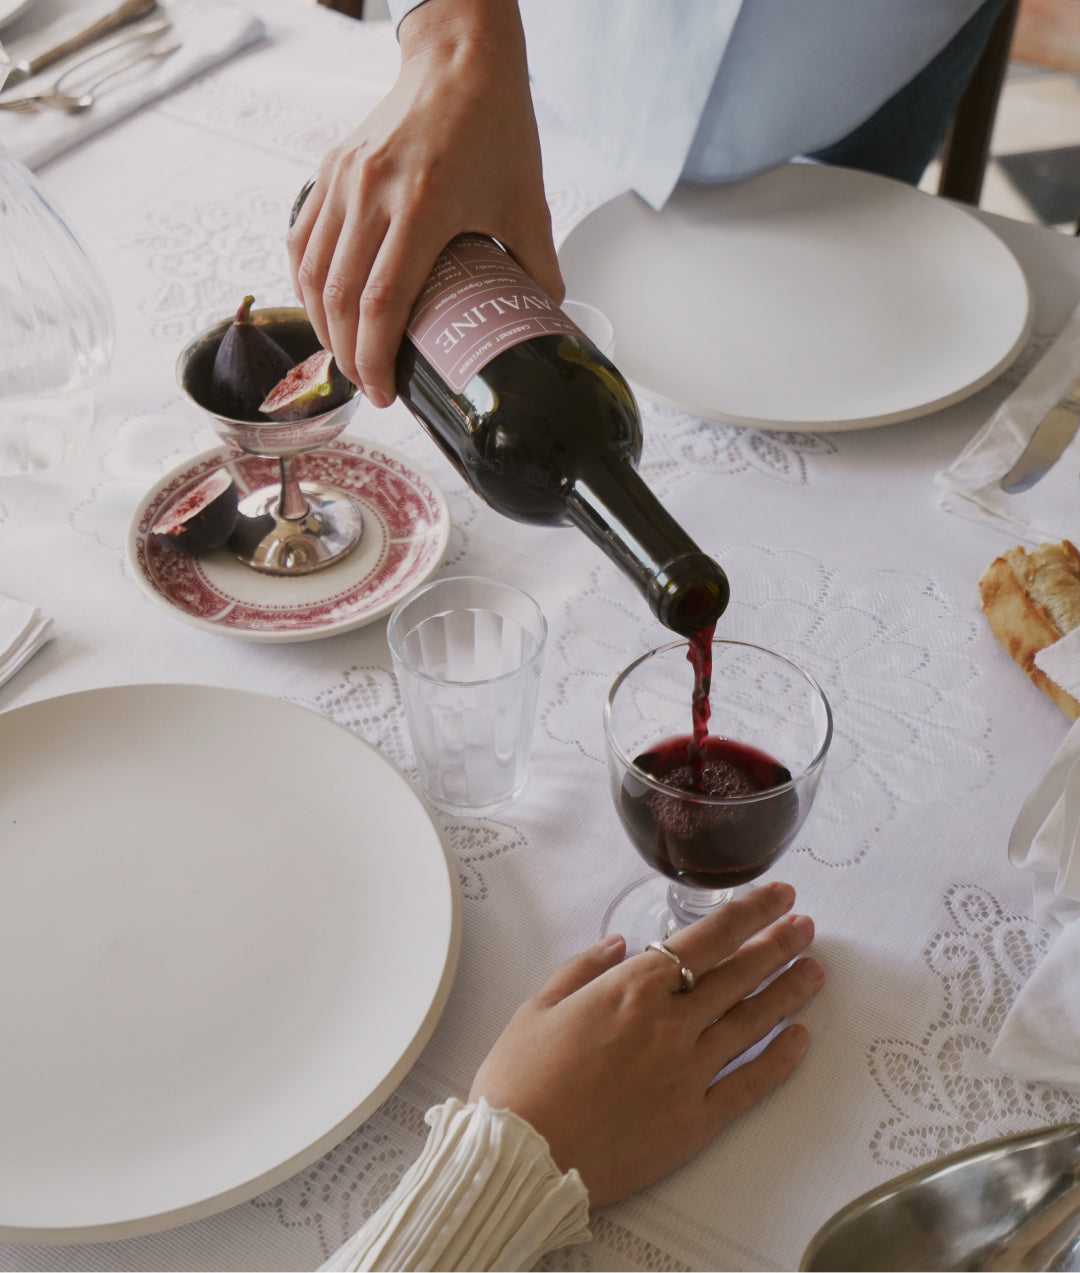 A bottle of Avaline Cabernet Sauvignon being poured into a wine glass on a dinner table